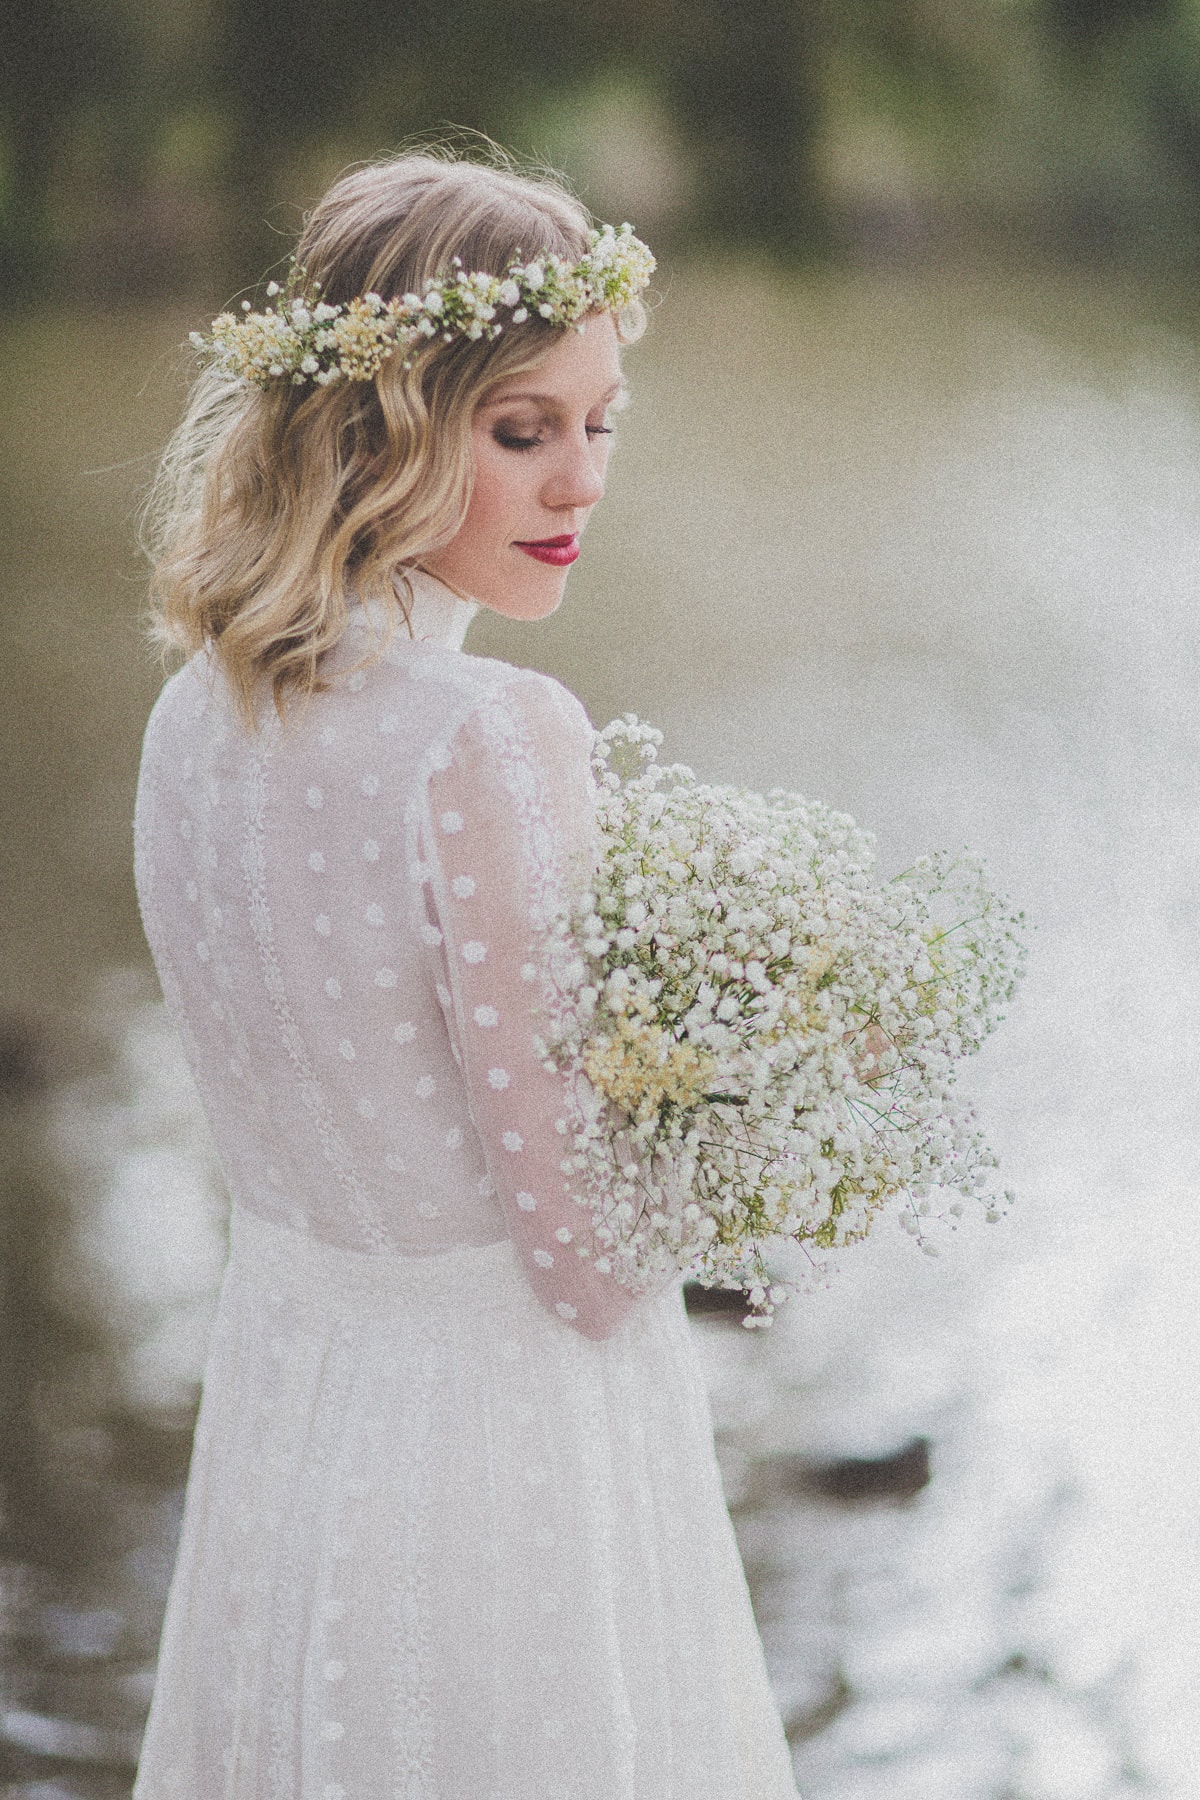 styled photoshoot in melbourne - pretty bride boho style - vintage 